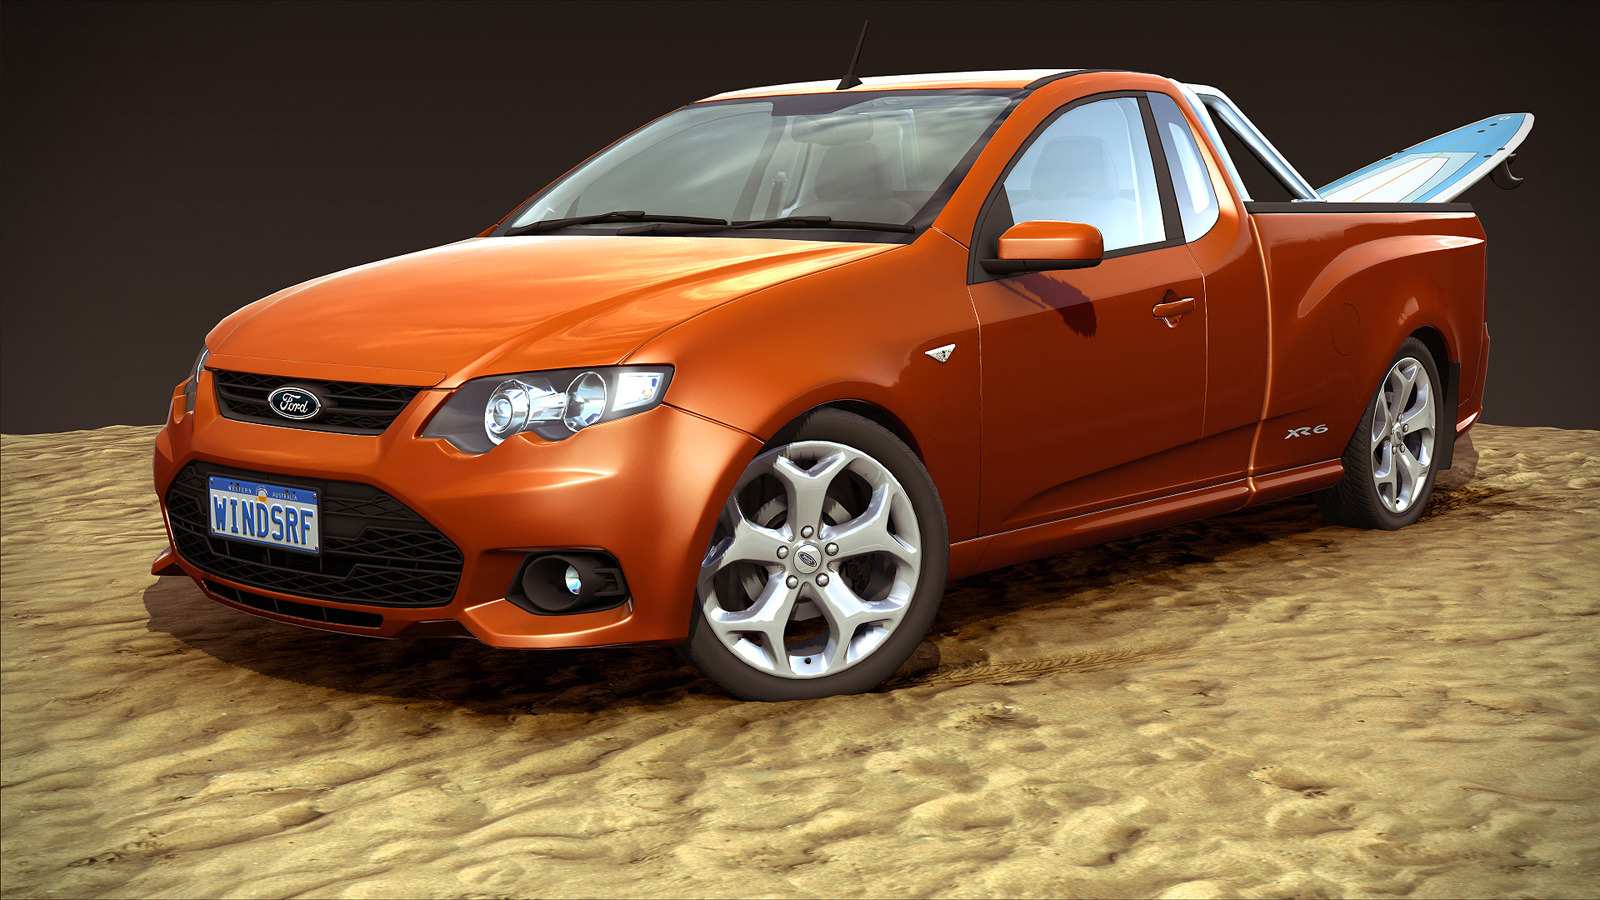 Ford Falcon Xr6 HD Wallpaper Background